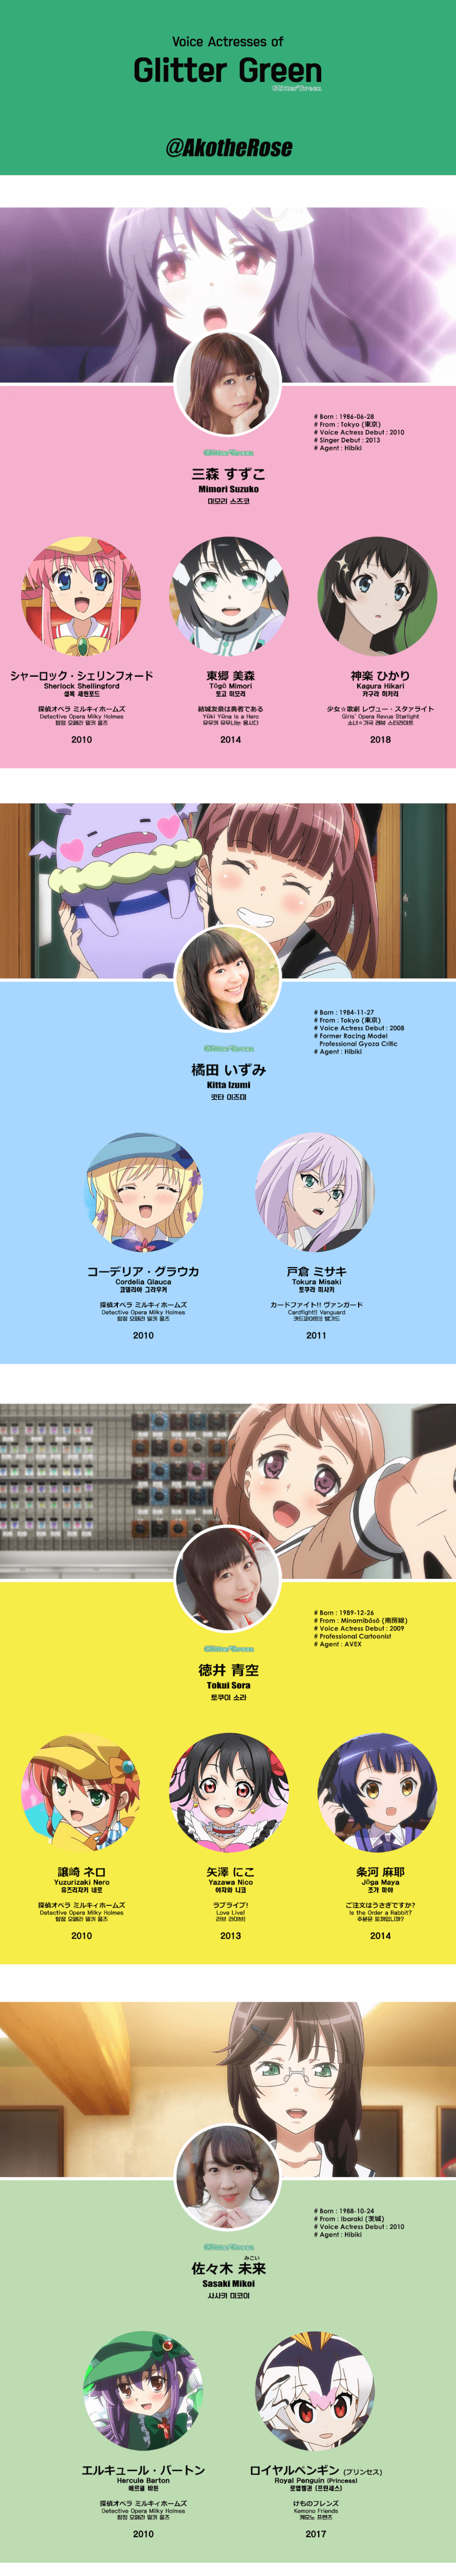     BanG_Dream's Voice Actresses Series

1. Poppin' Party

2. Afterglow

3. Pastel Palettes 

4....